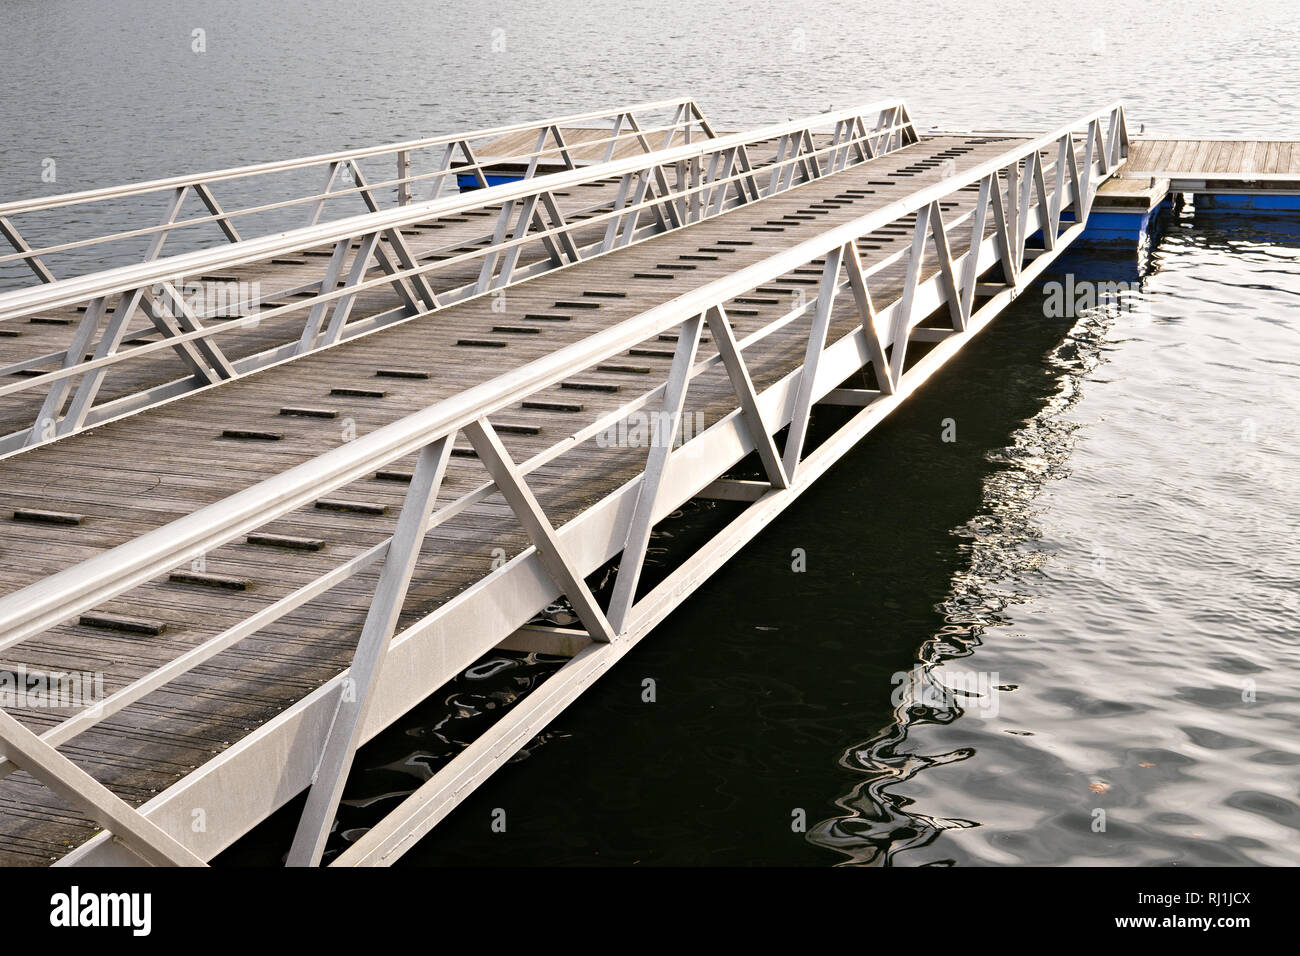 Modern wooden jetty or pier with metal sides without people or boats. Boat ramp and pier Stock Photo